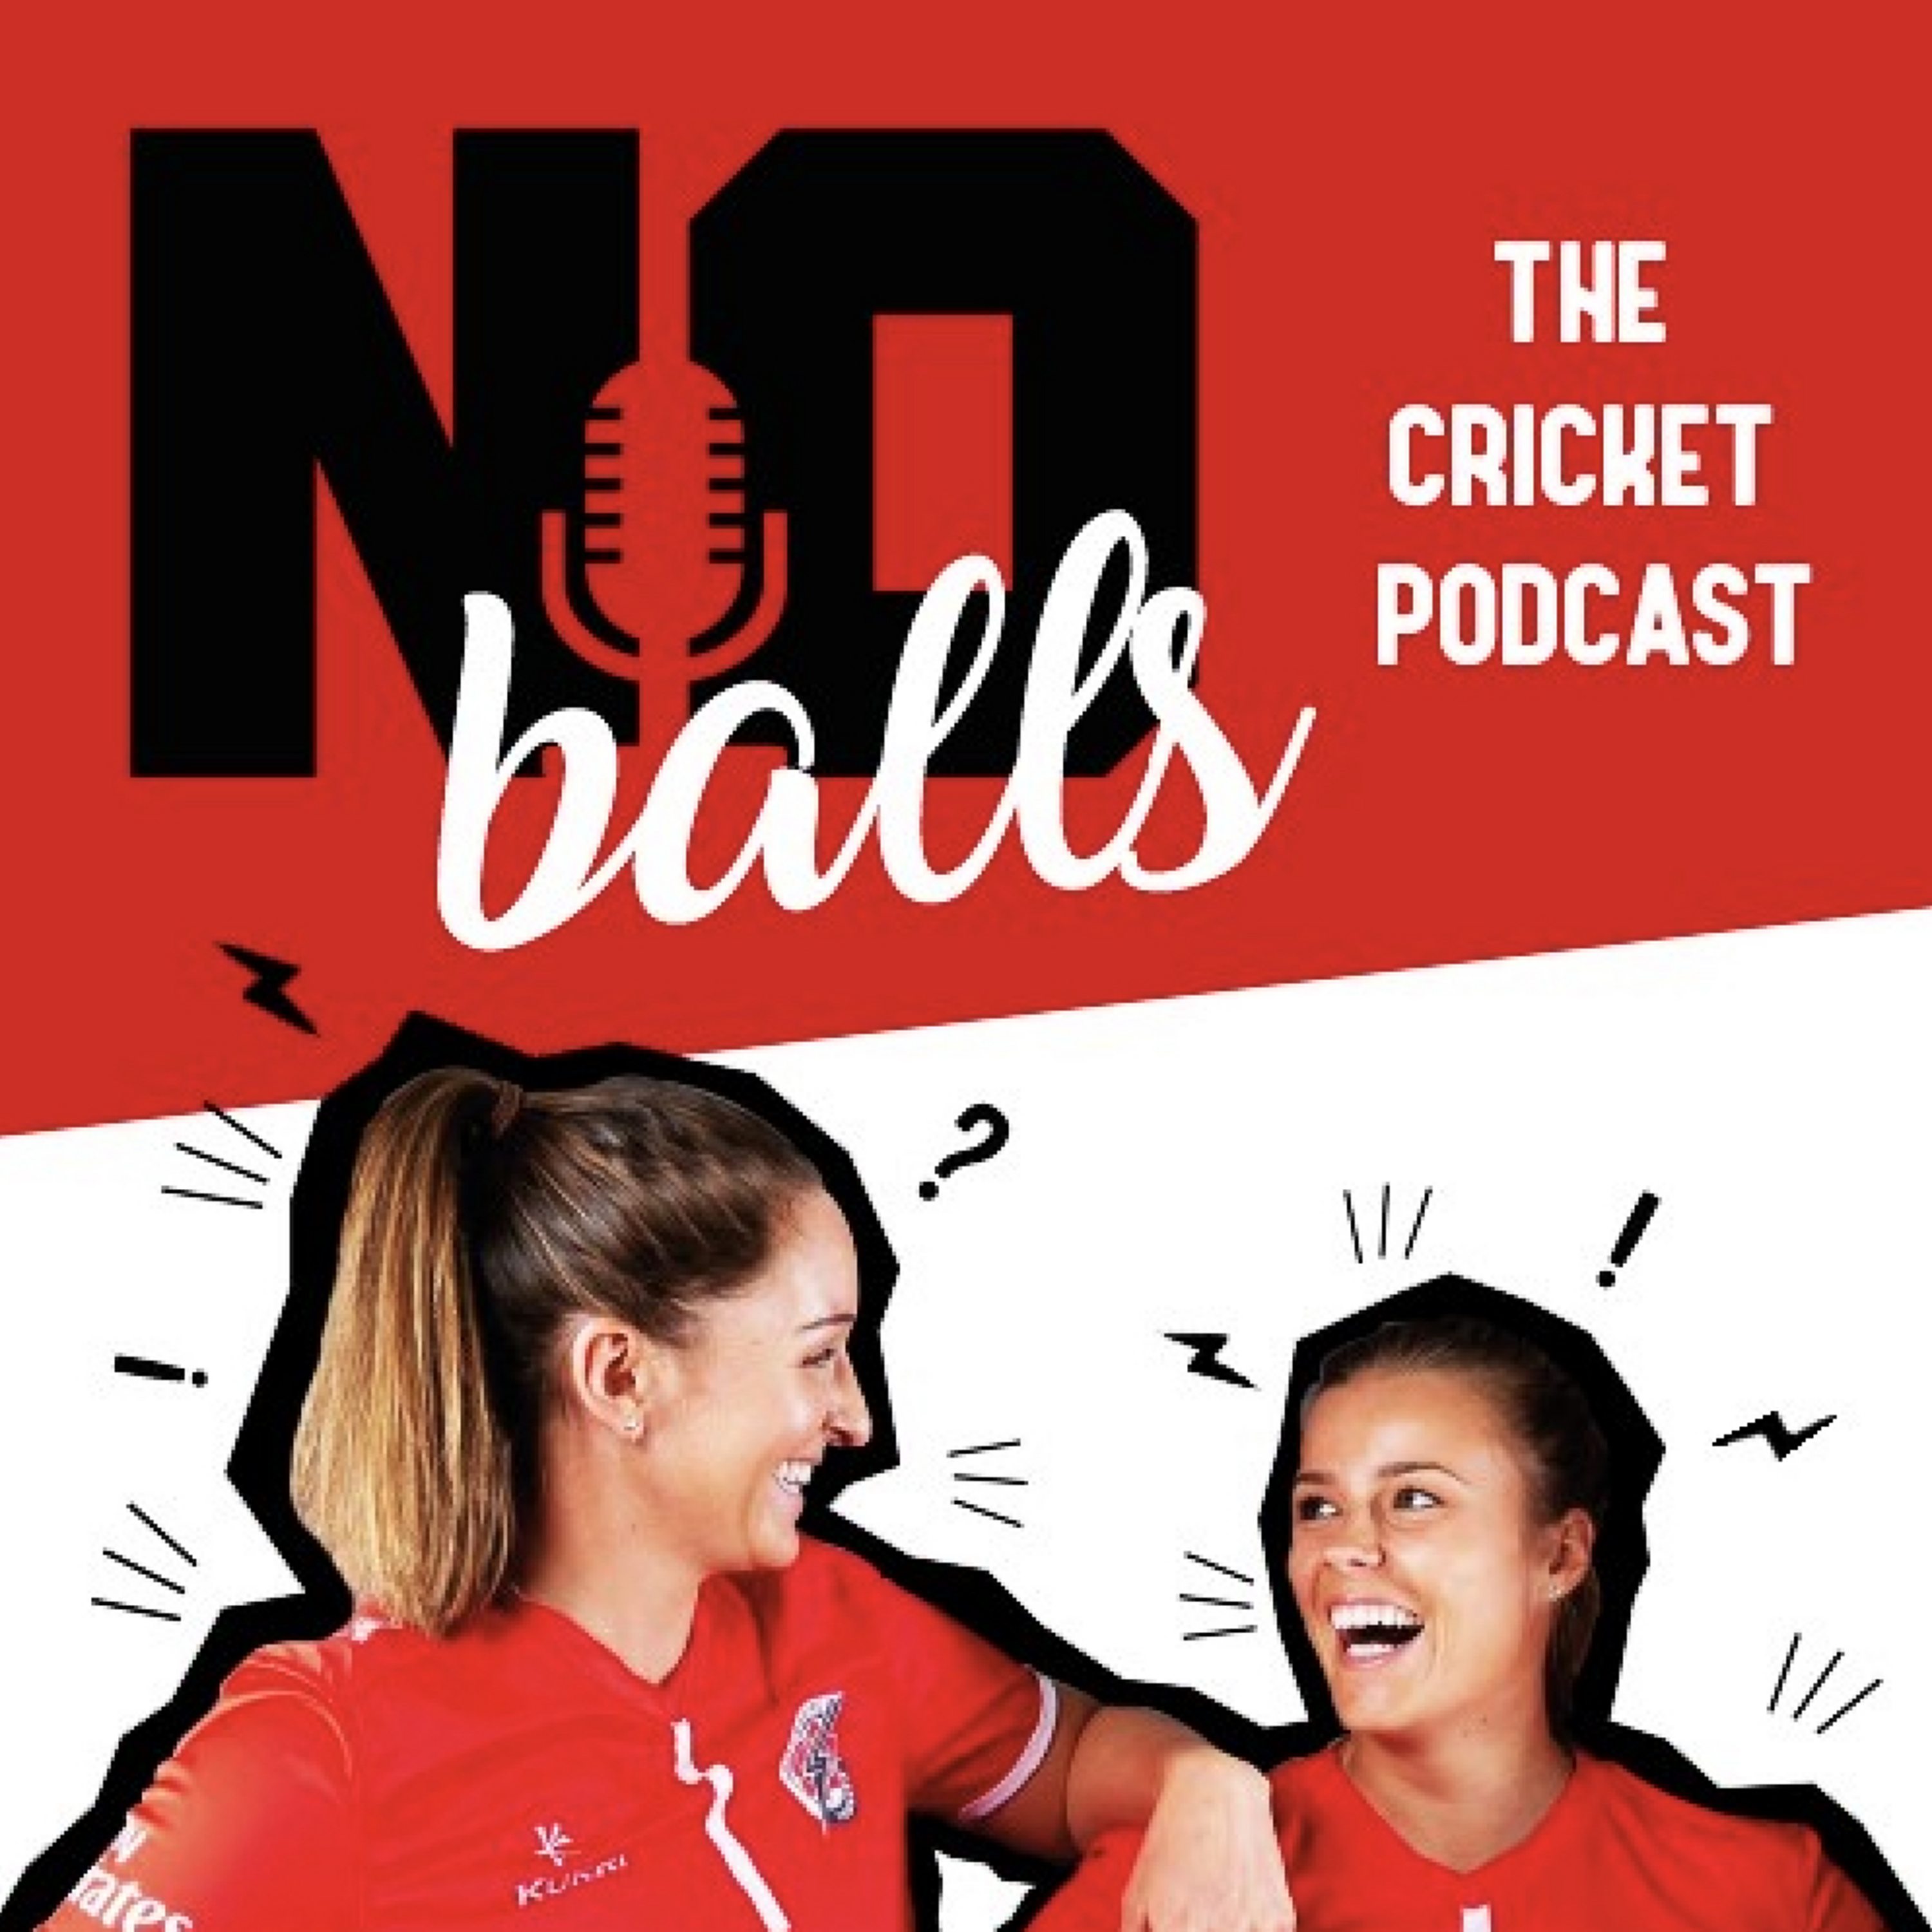 No Balls: The Cricket Podcast - how do you cut your sandwiches?